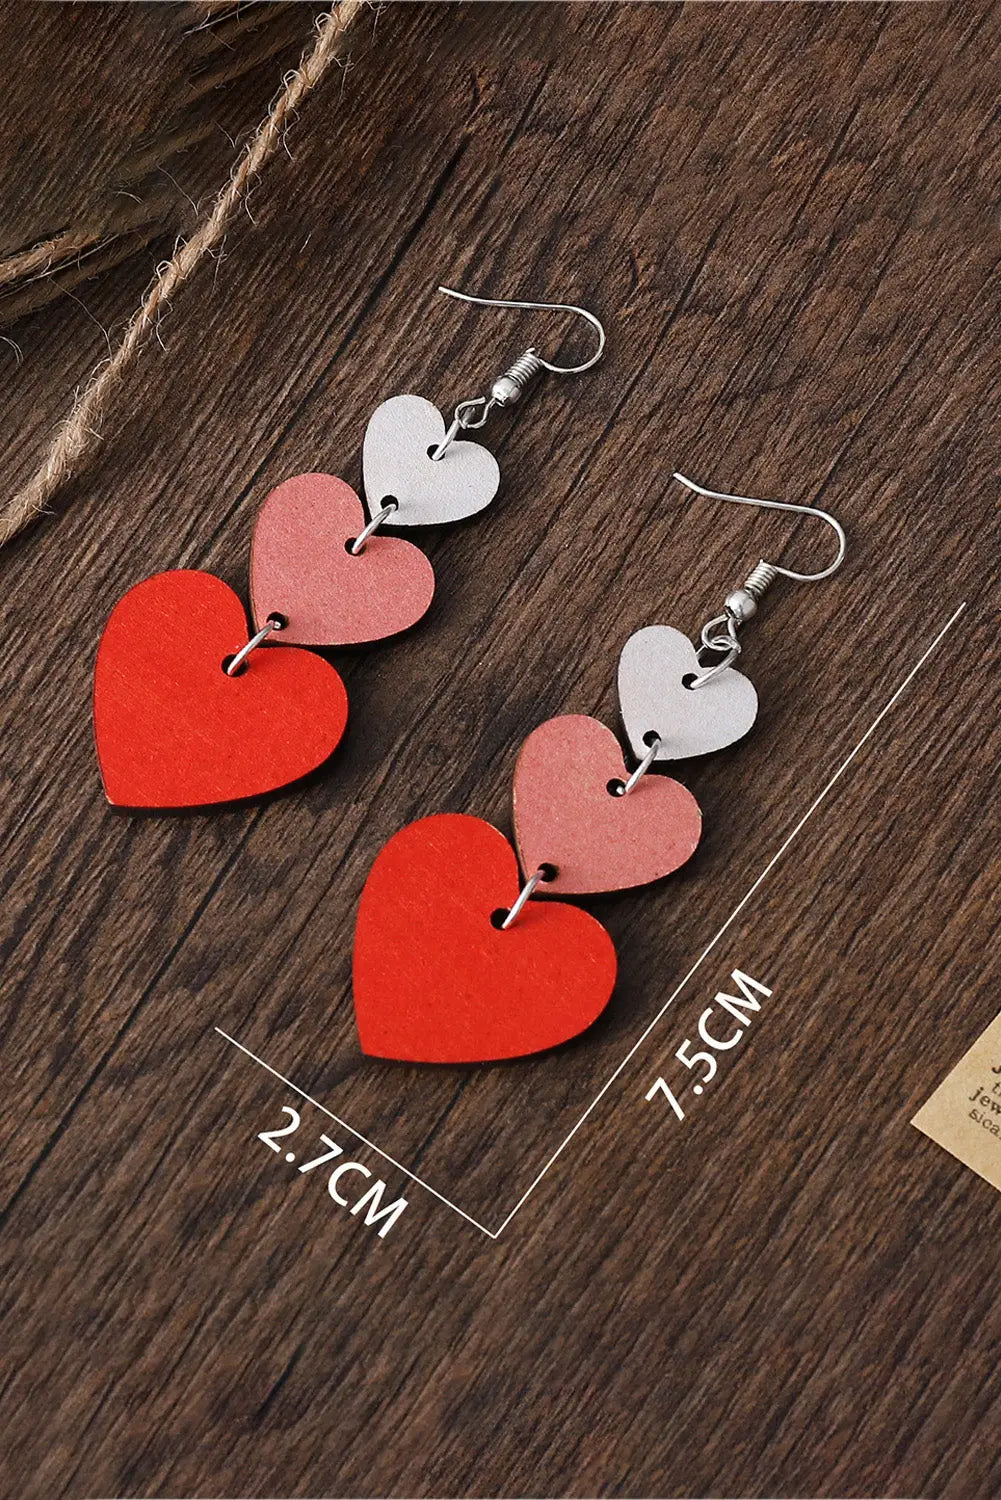 Red valentines day heart shape tiered dangle earring - one size / 100% wood - earrings